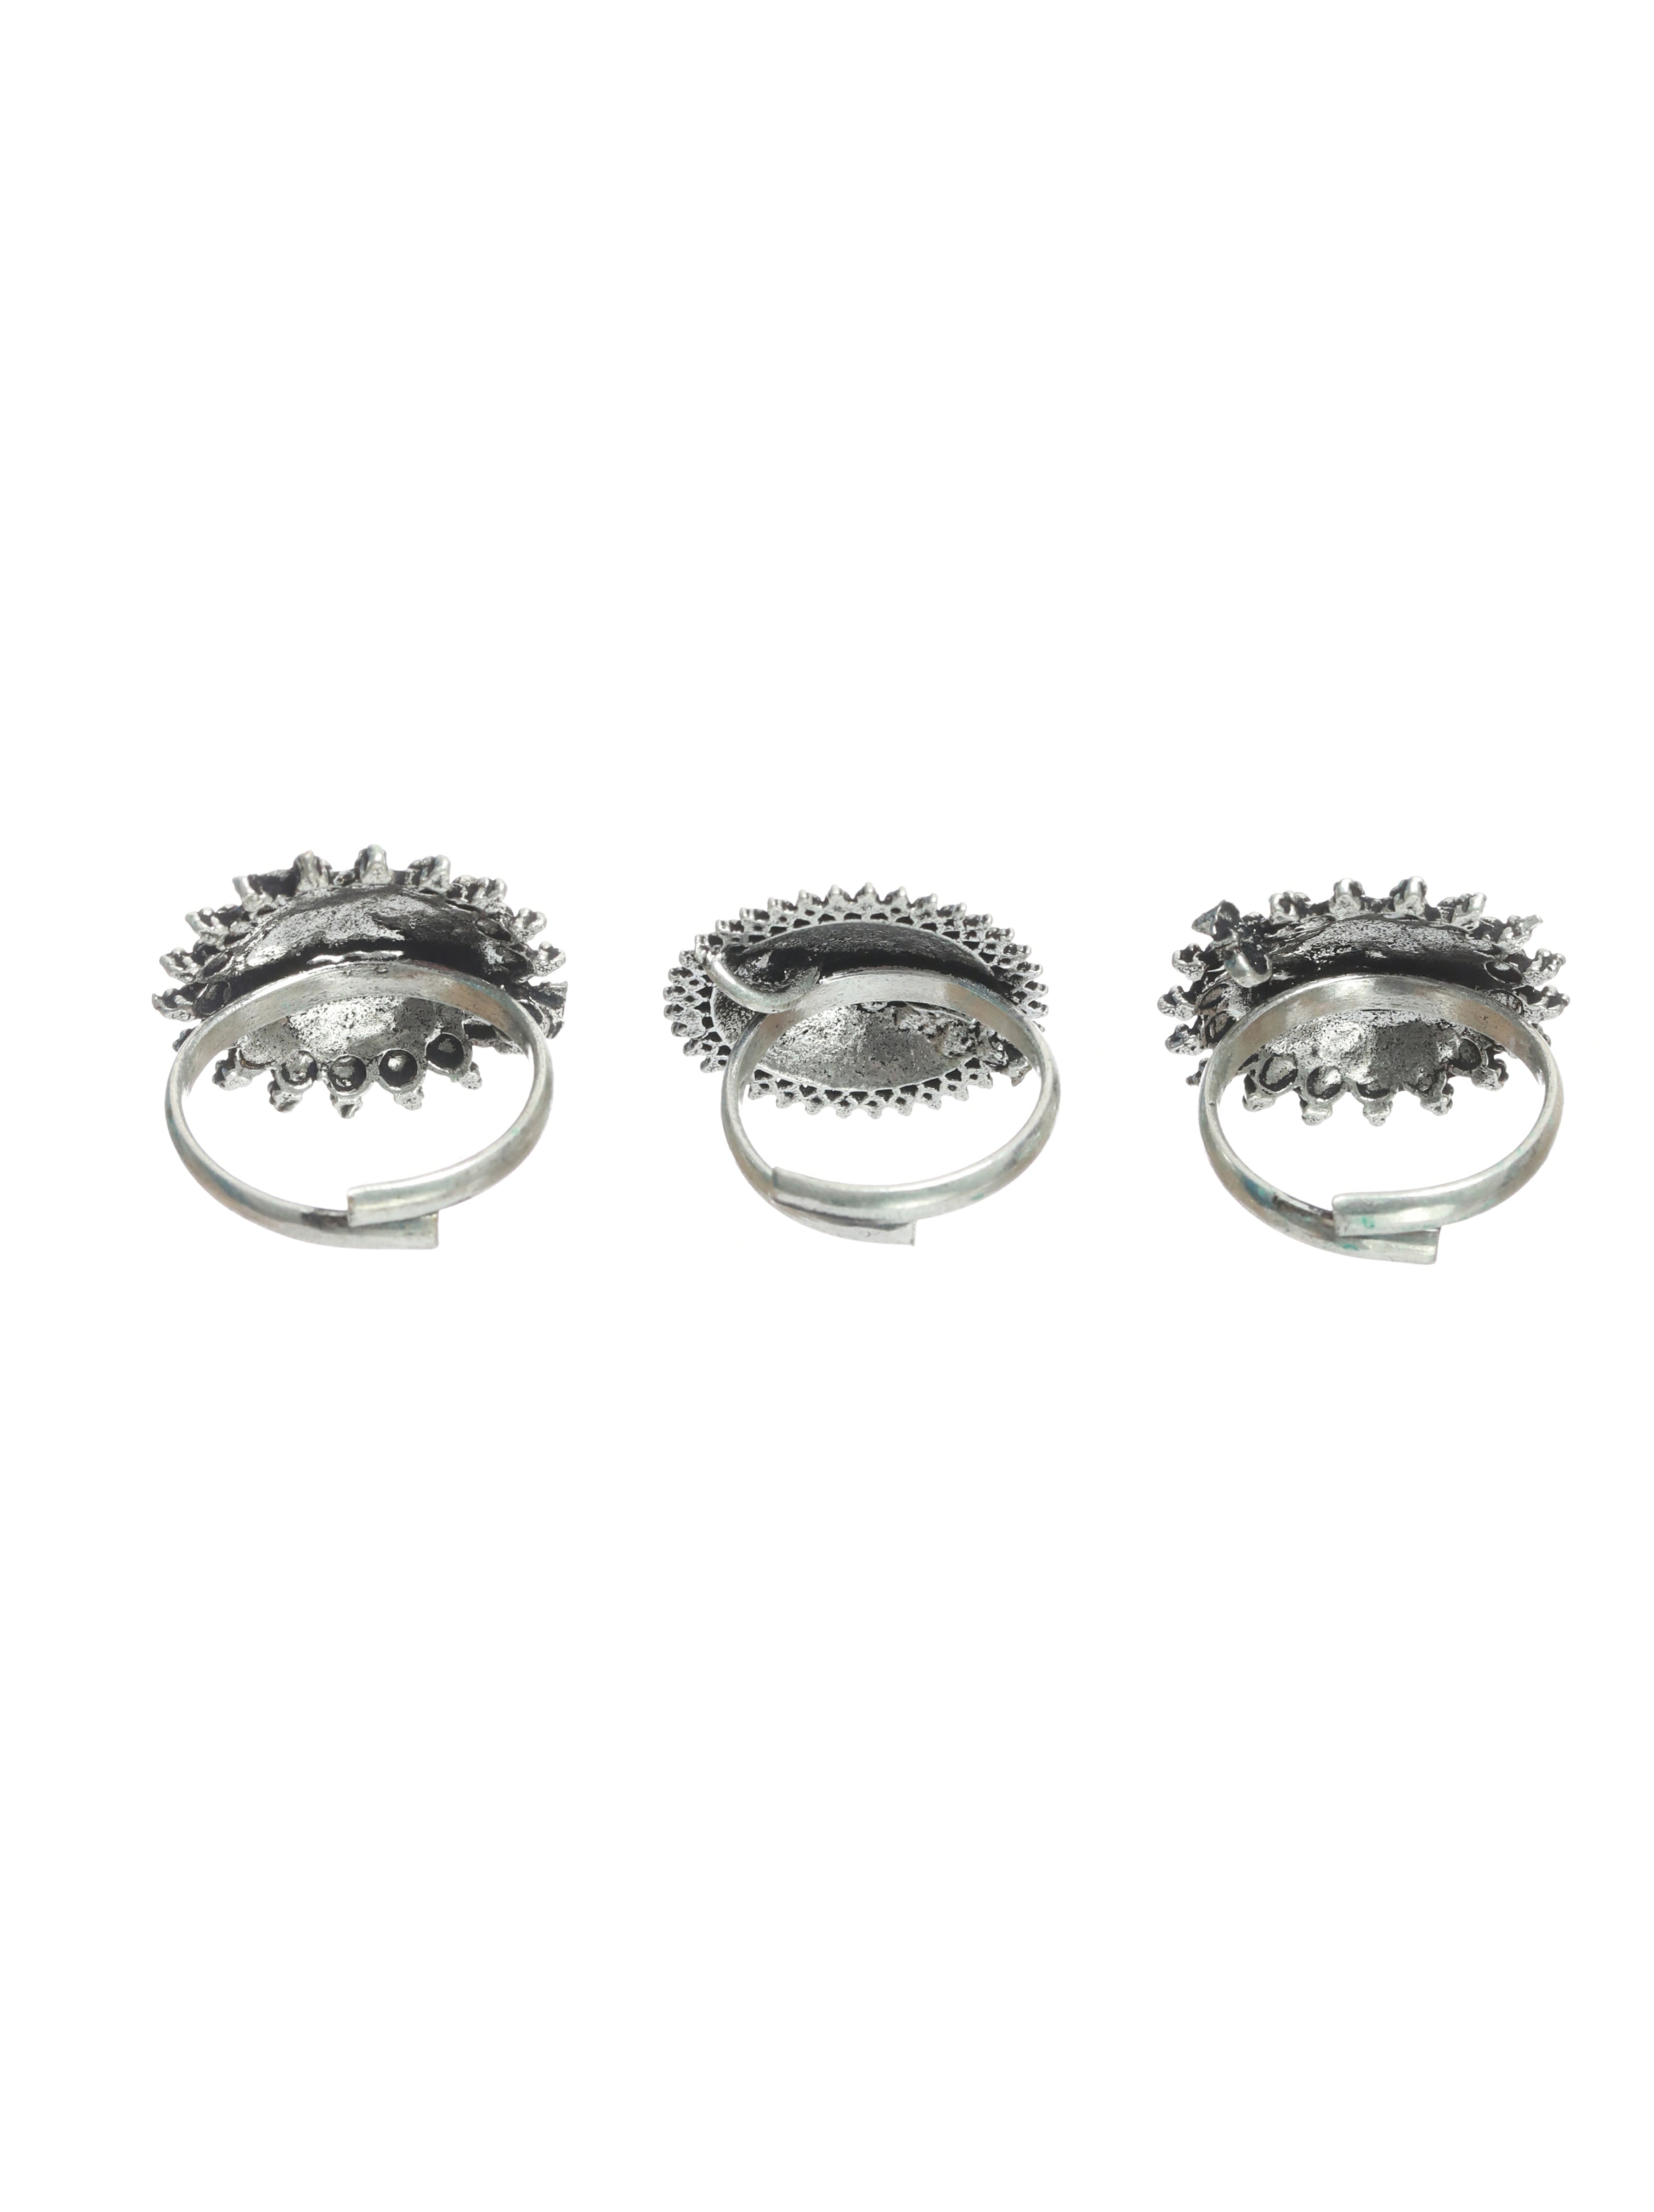 Oxidised Silver-Plated German Silver Jewellery Set with Bracelet,Ring & Toe Ring